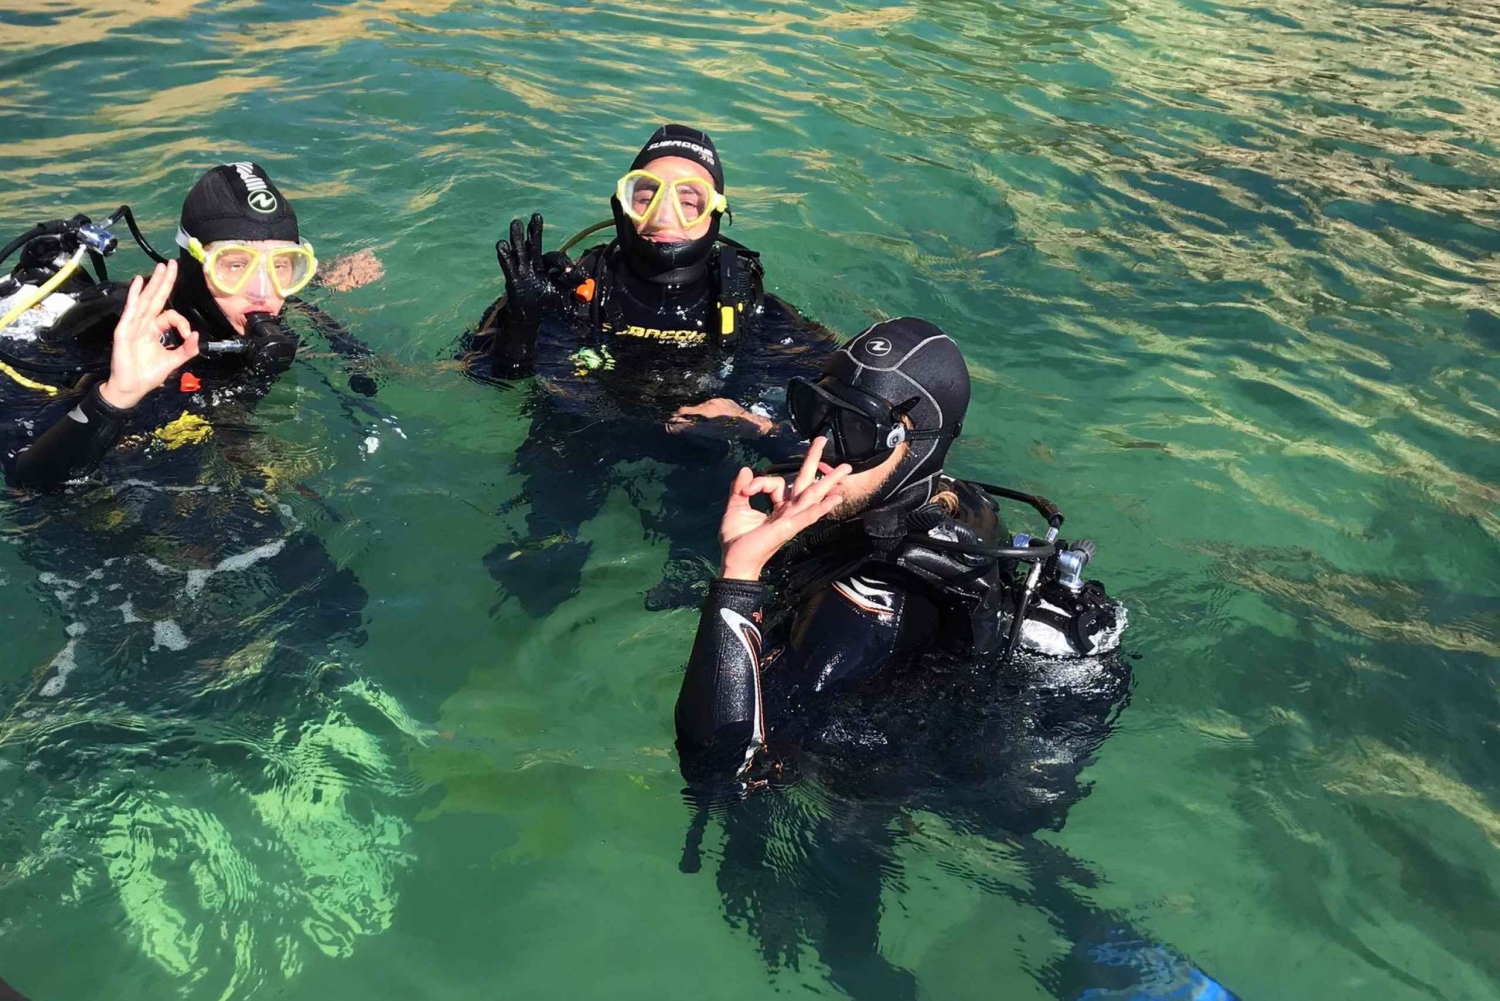 Lagos: Guided Scuba Diving Trip for Beginners